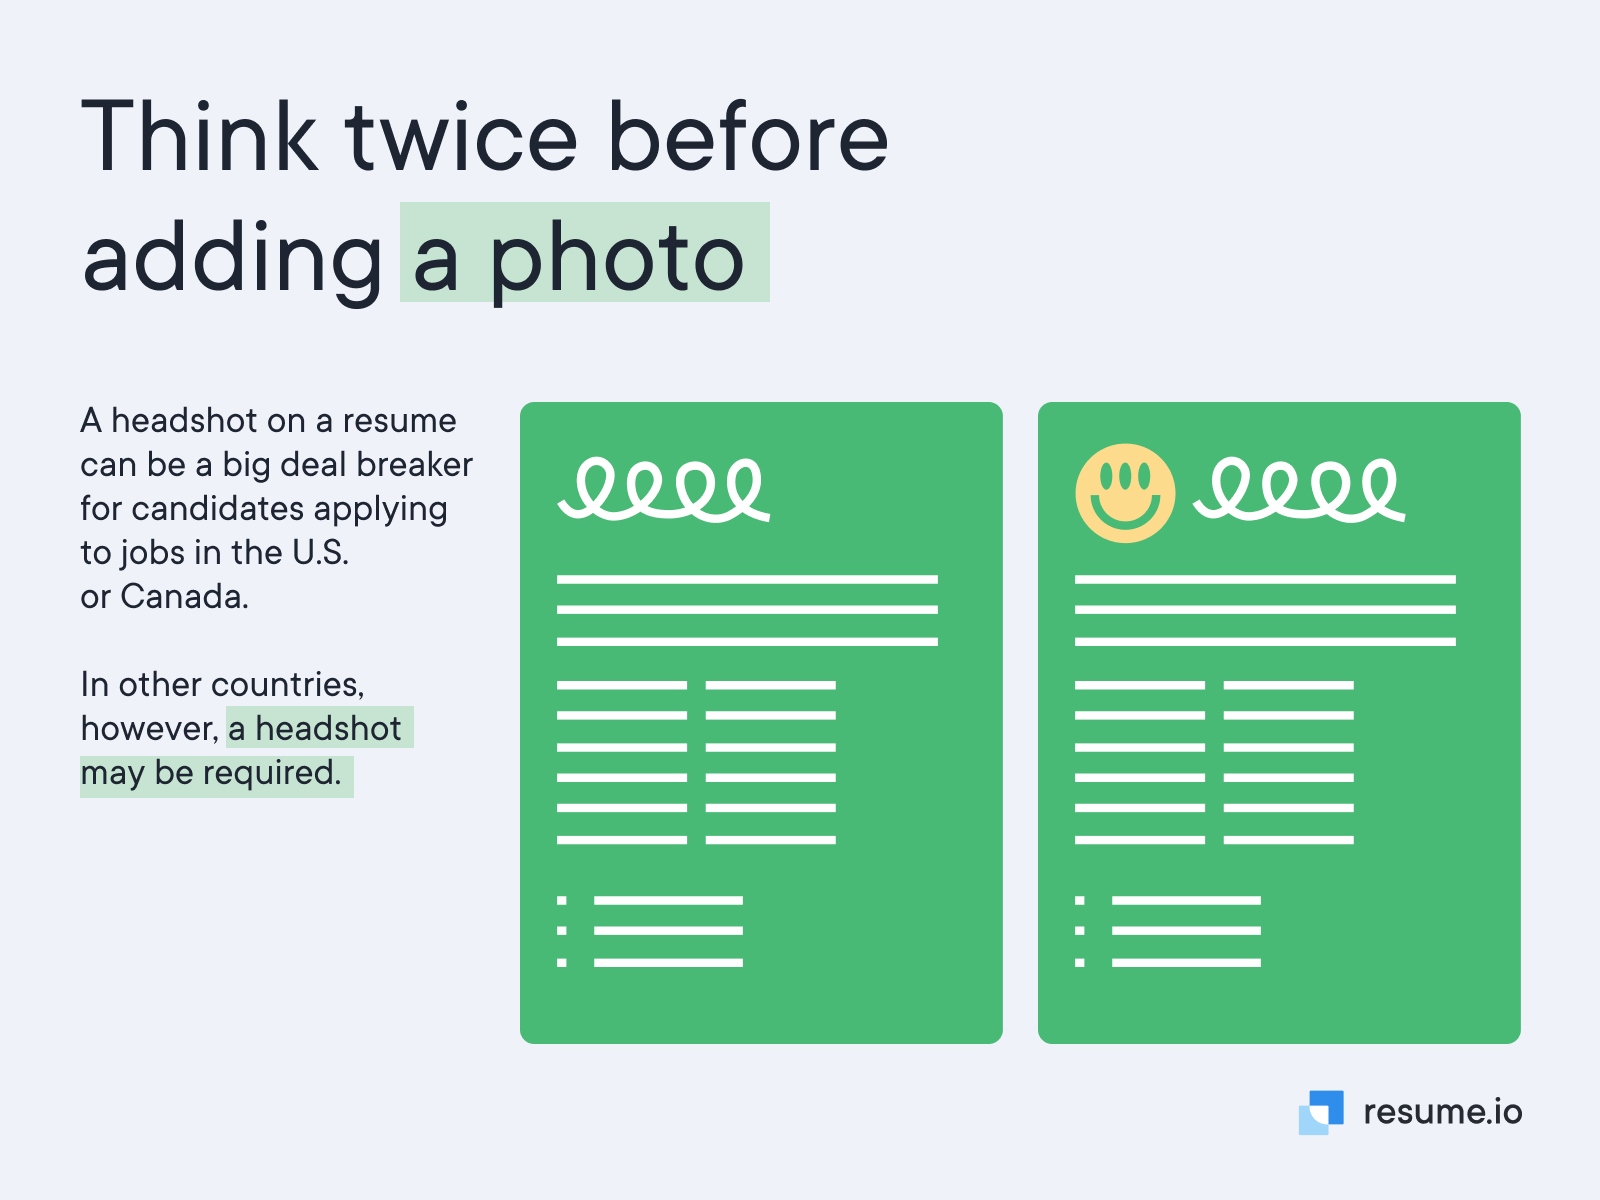 Think twice before adding a photo